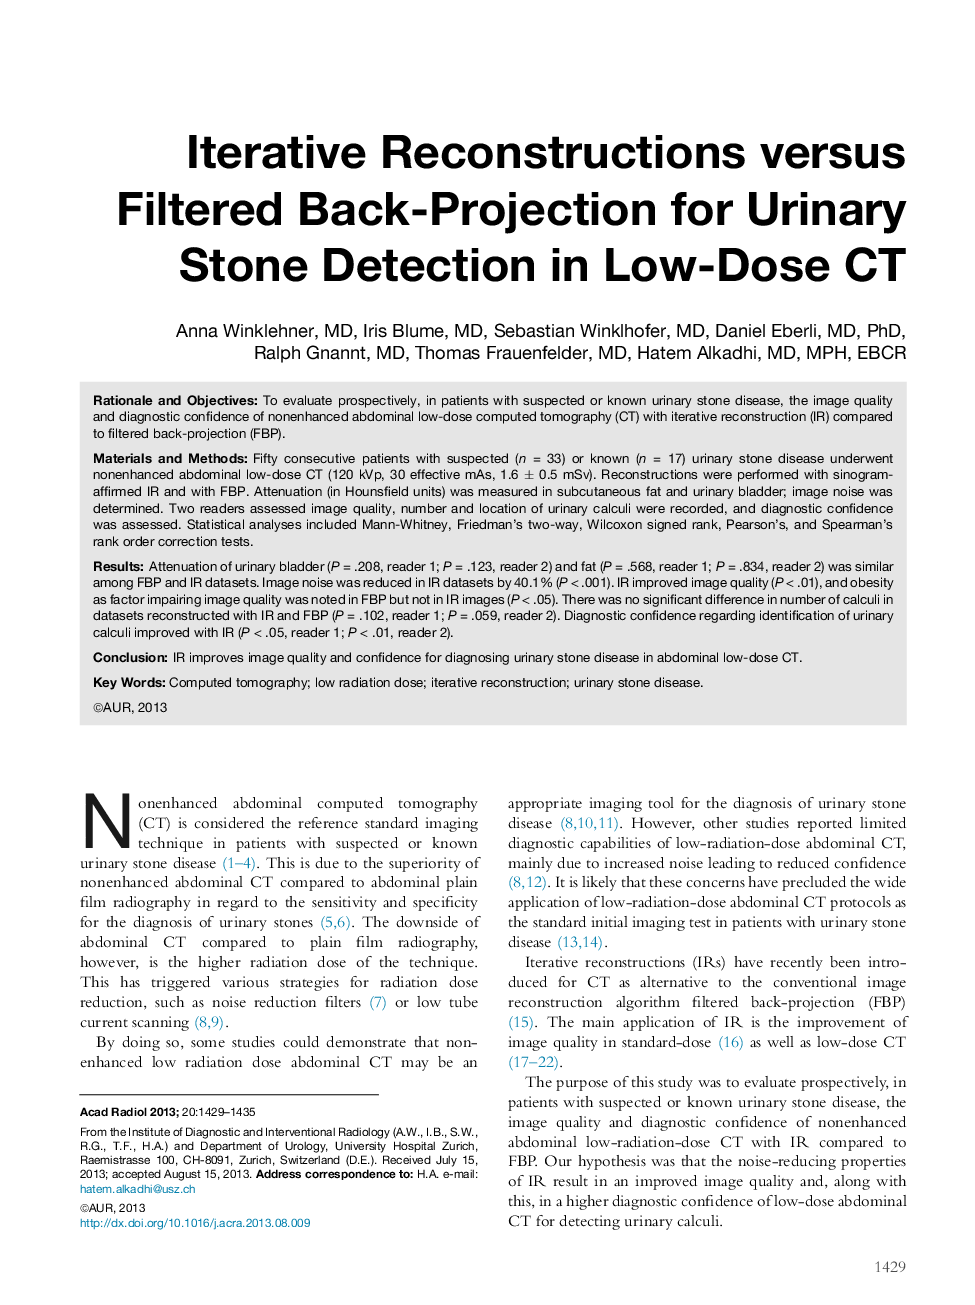 Iterative Reconstructions versus Filtered Back-Projection for Urinary Stone Detection in Low-Dose CT